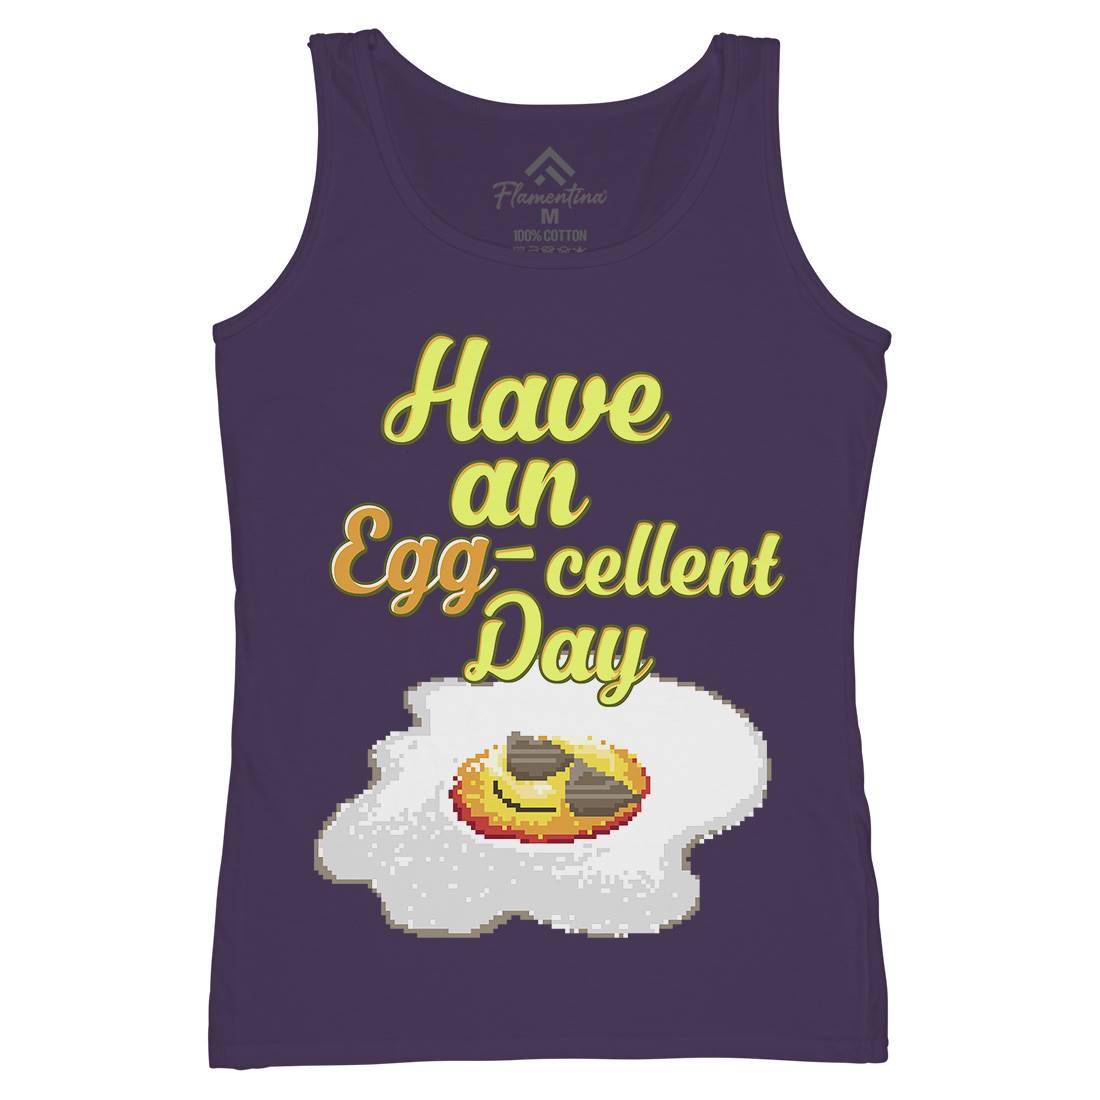 Have An Eggcellent Day Womens Organic Tank Top Vest Food B911